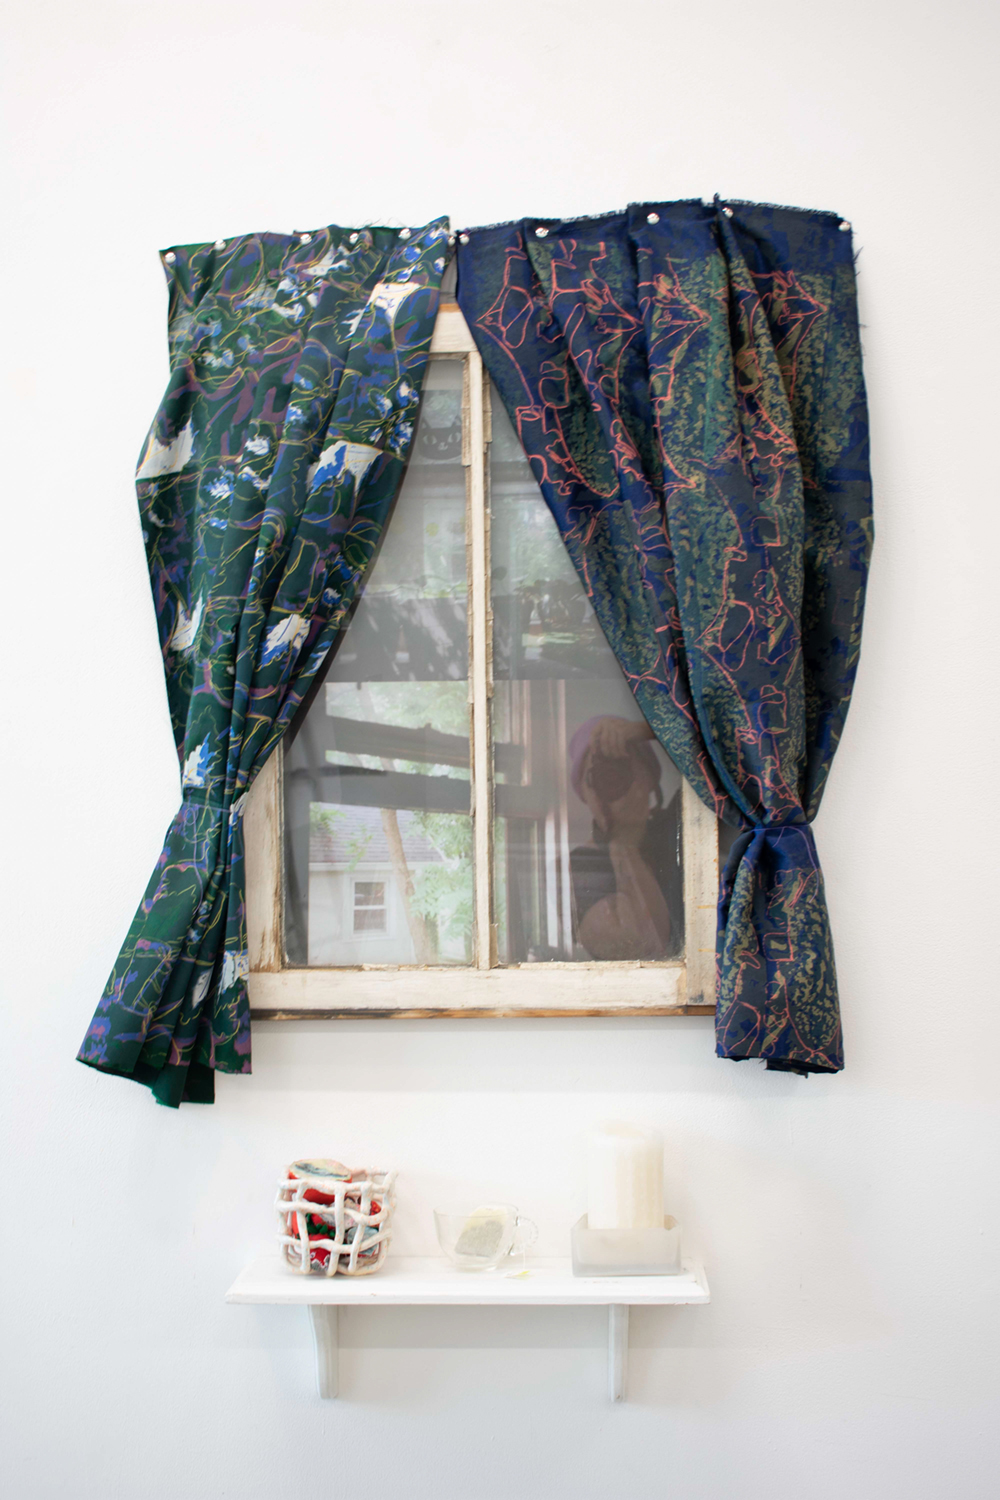 A small shelf beneath a window with curtains in the Headspace, Homebody installation